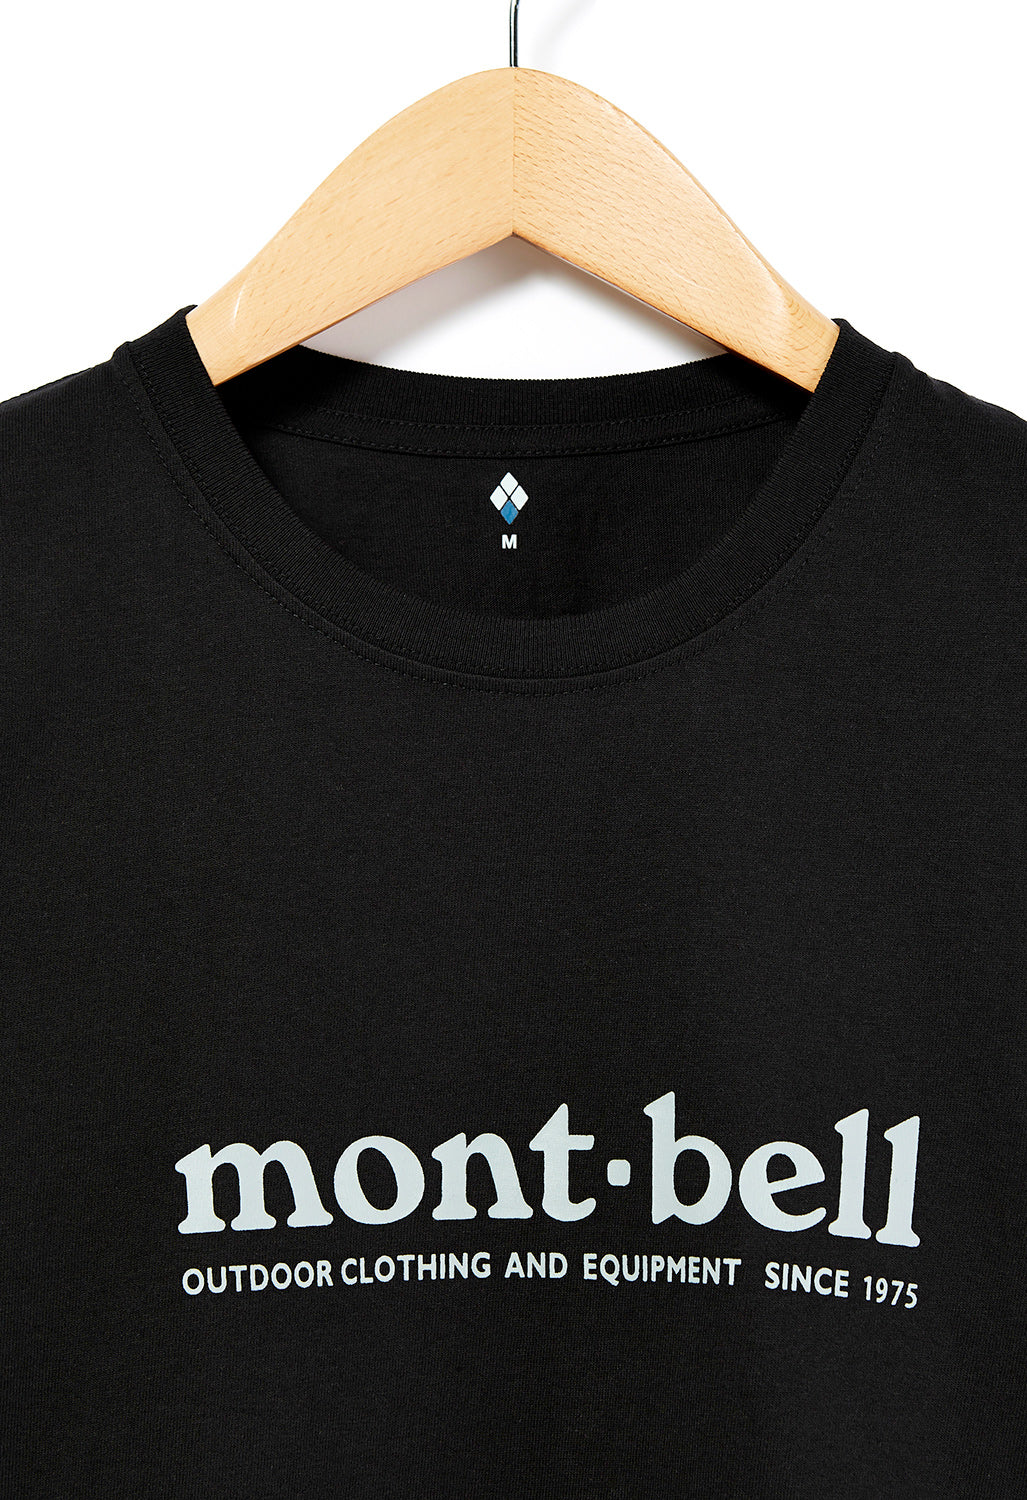 Montbell Pear Skin Cotton mont-bell T-Shirt - Black